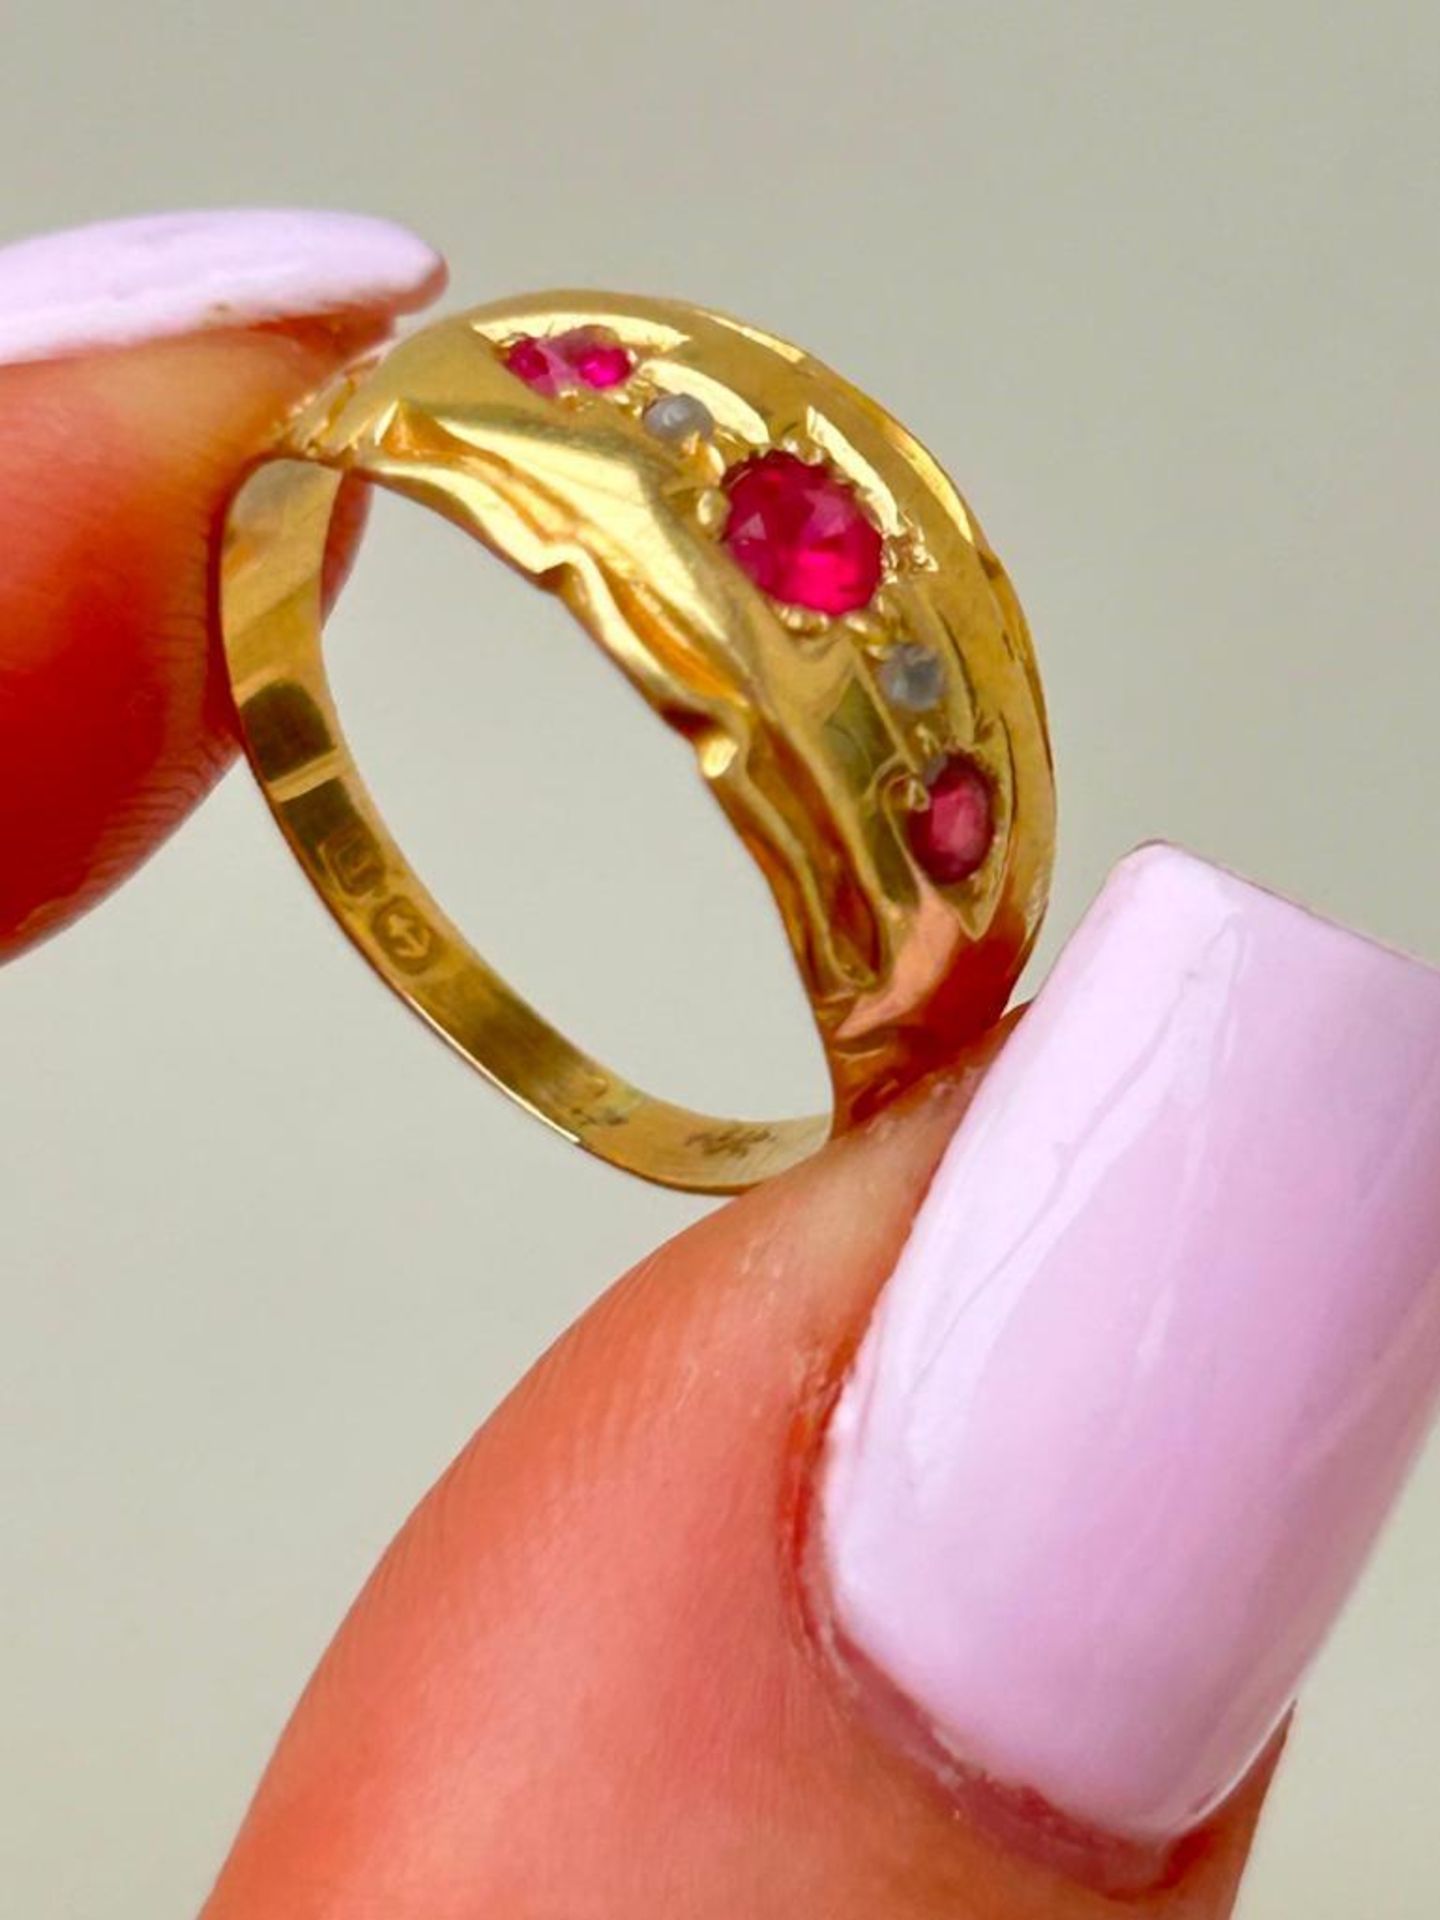 Amazing 18ct Yellow Gold Ruby and Diamond Ring - Image 5 of 8